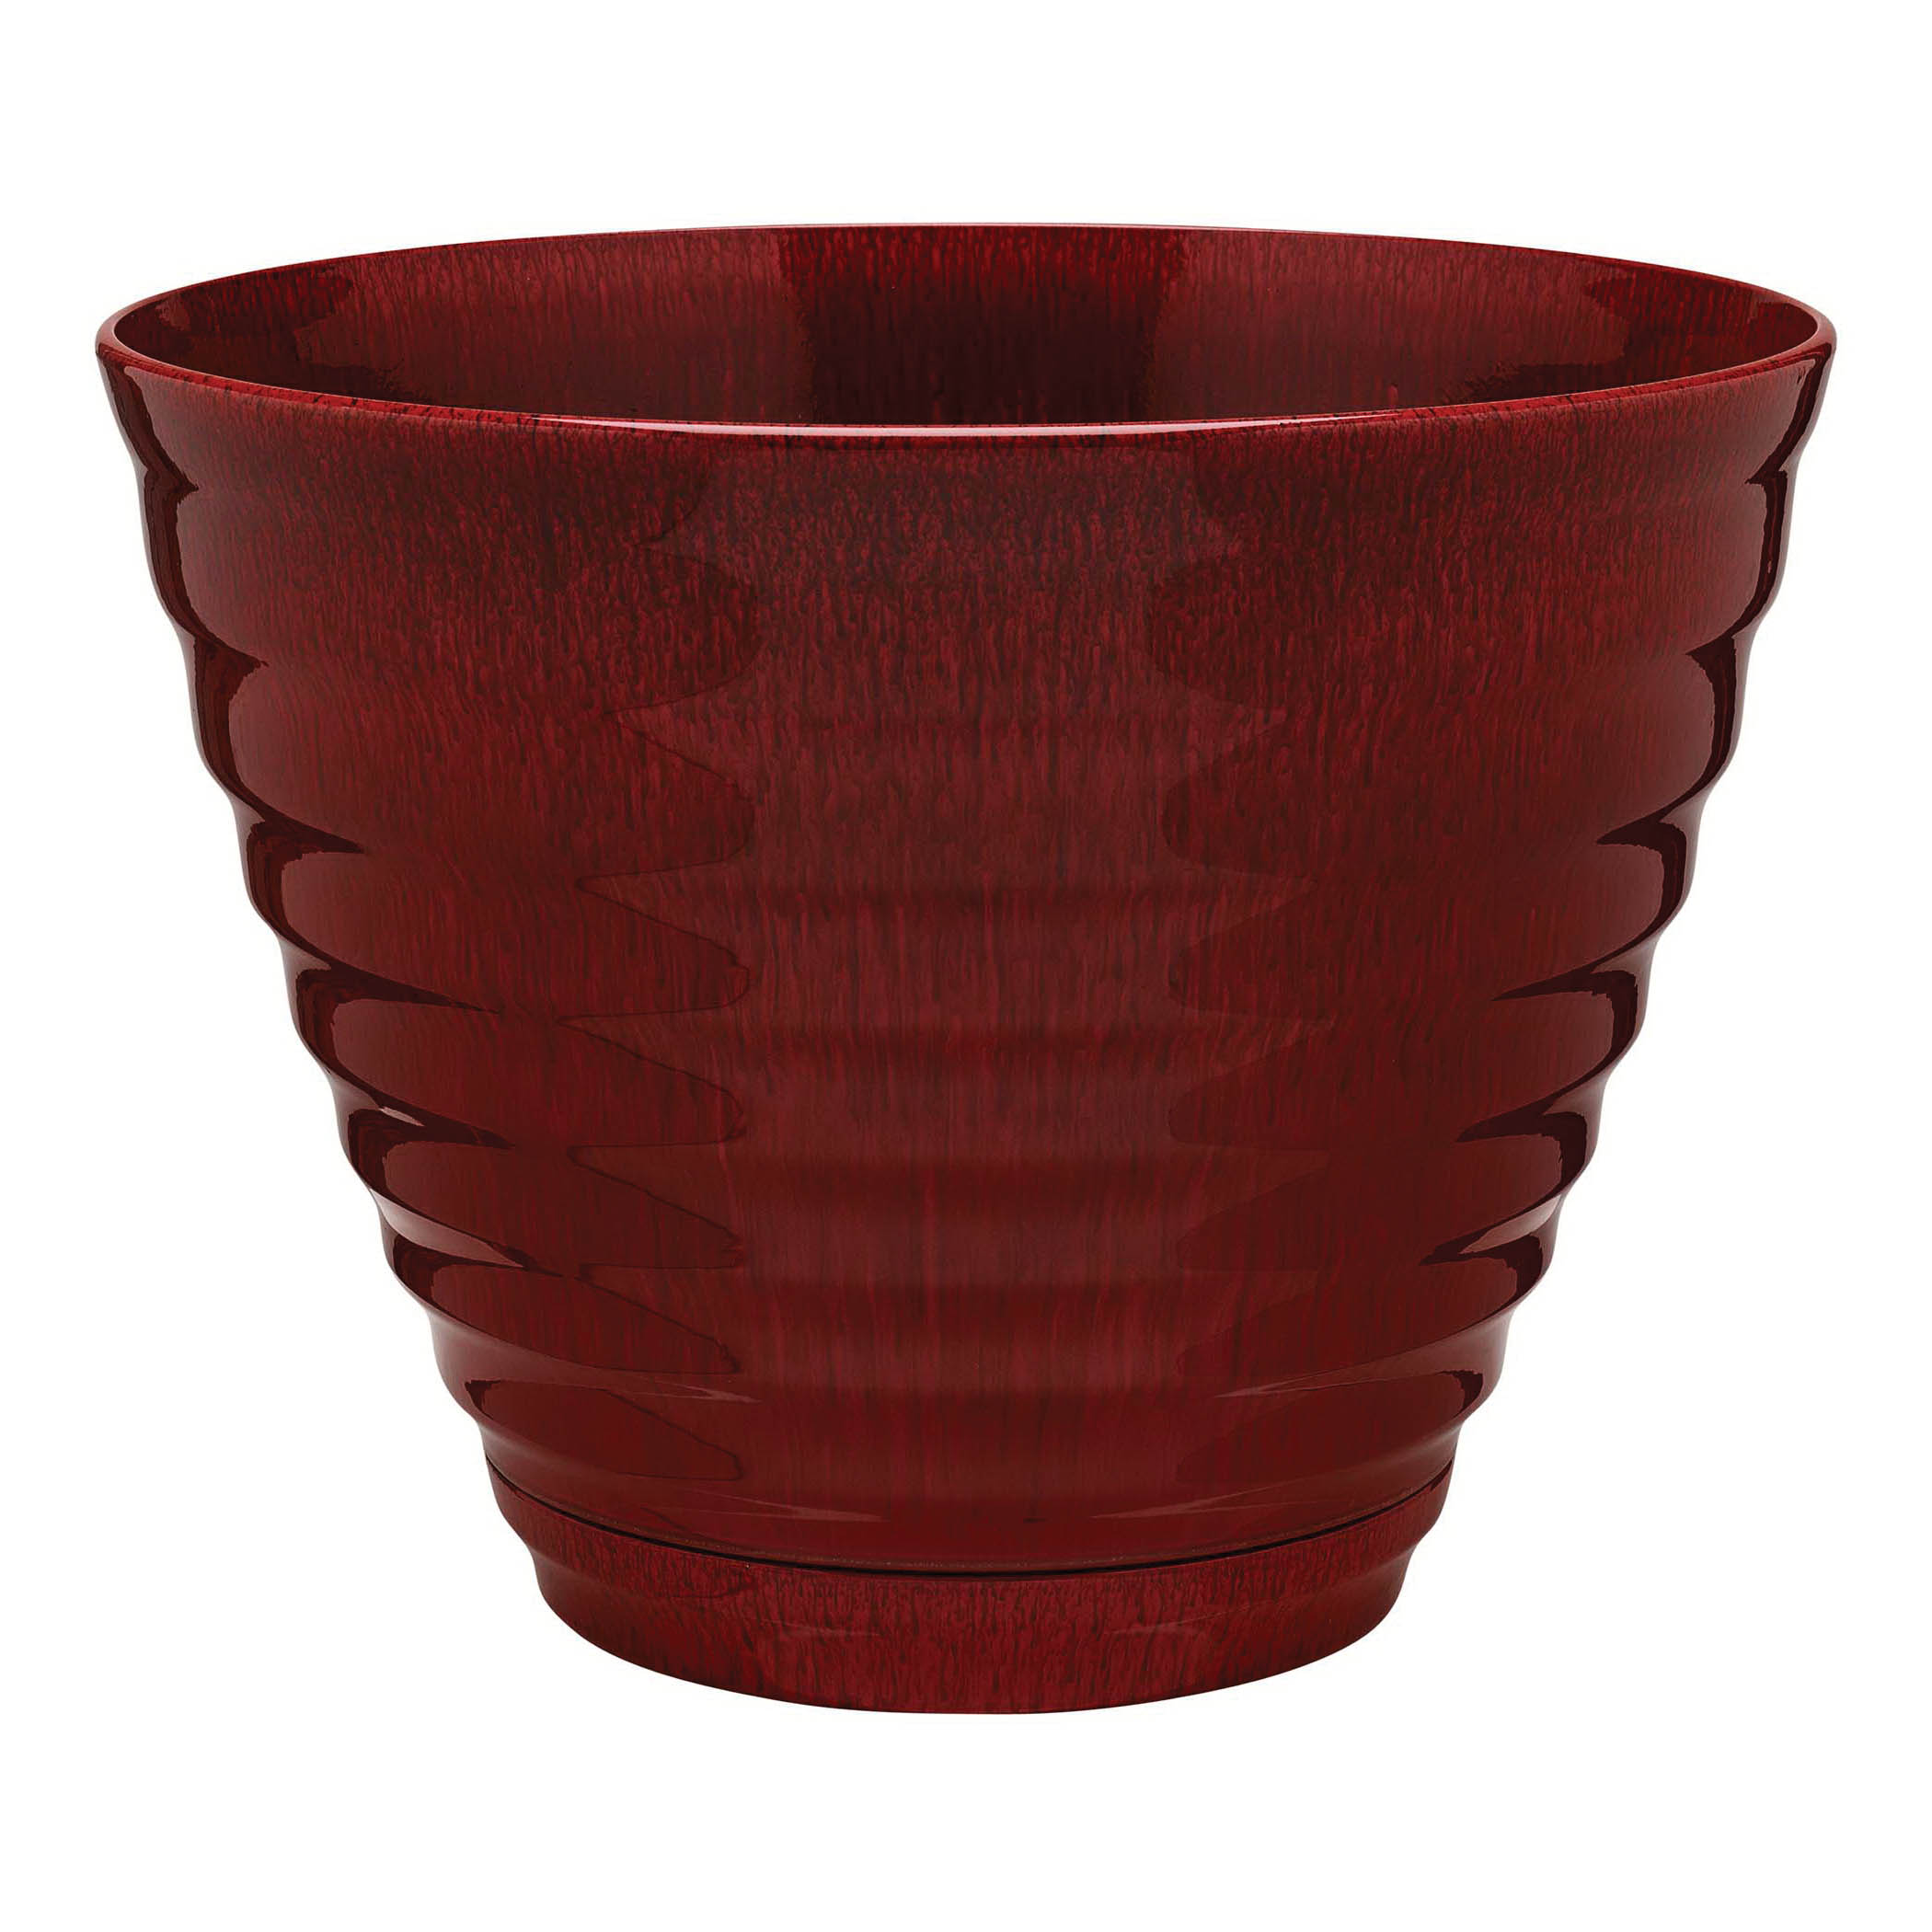 HDR-064763 Planter, 15.9 in Dia, Round, Beehive Design, Resin, Red